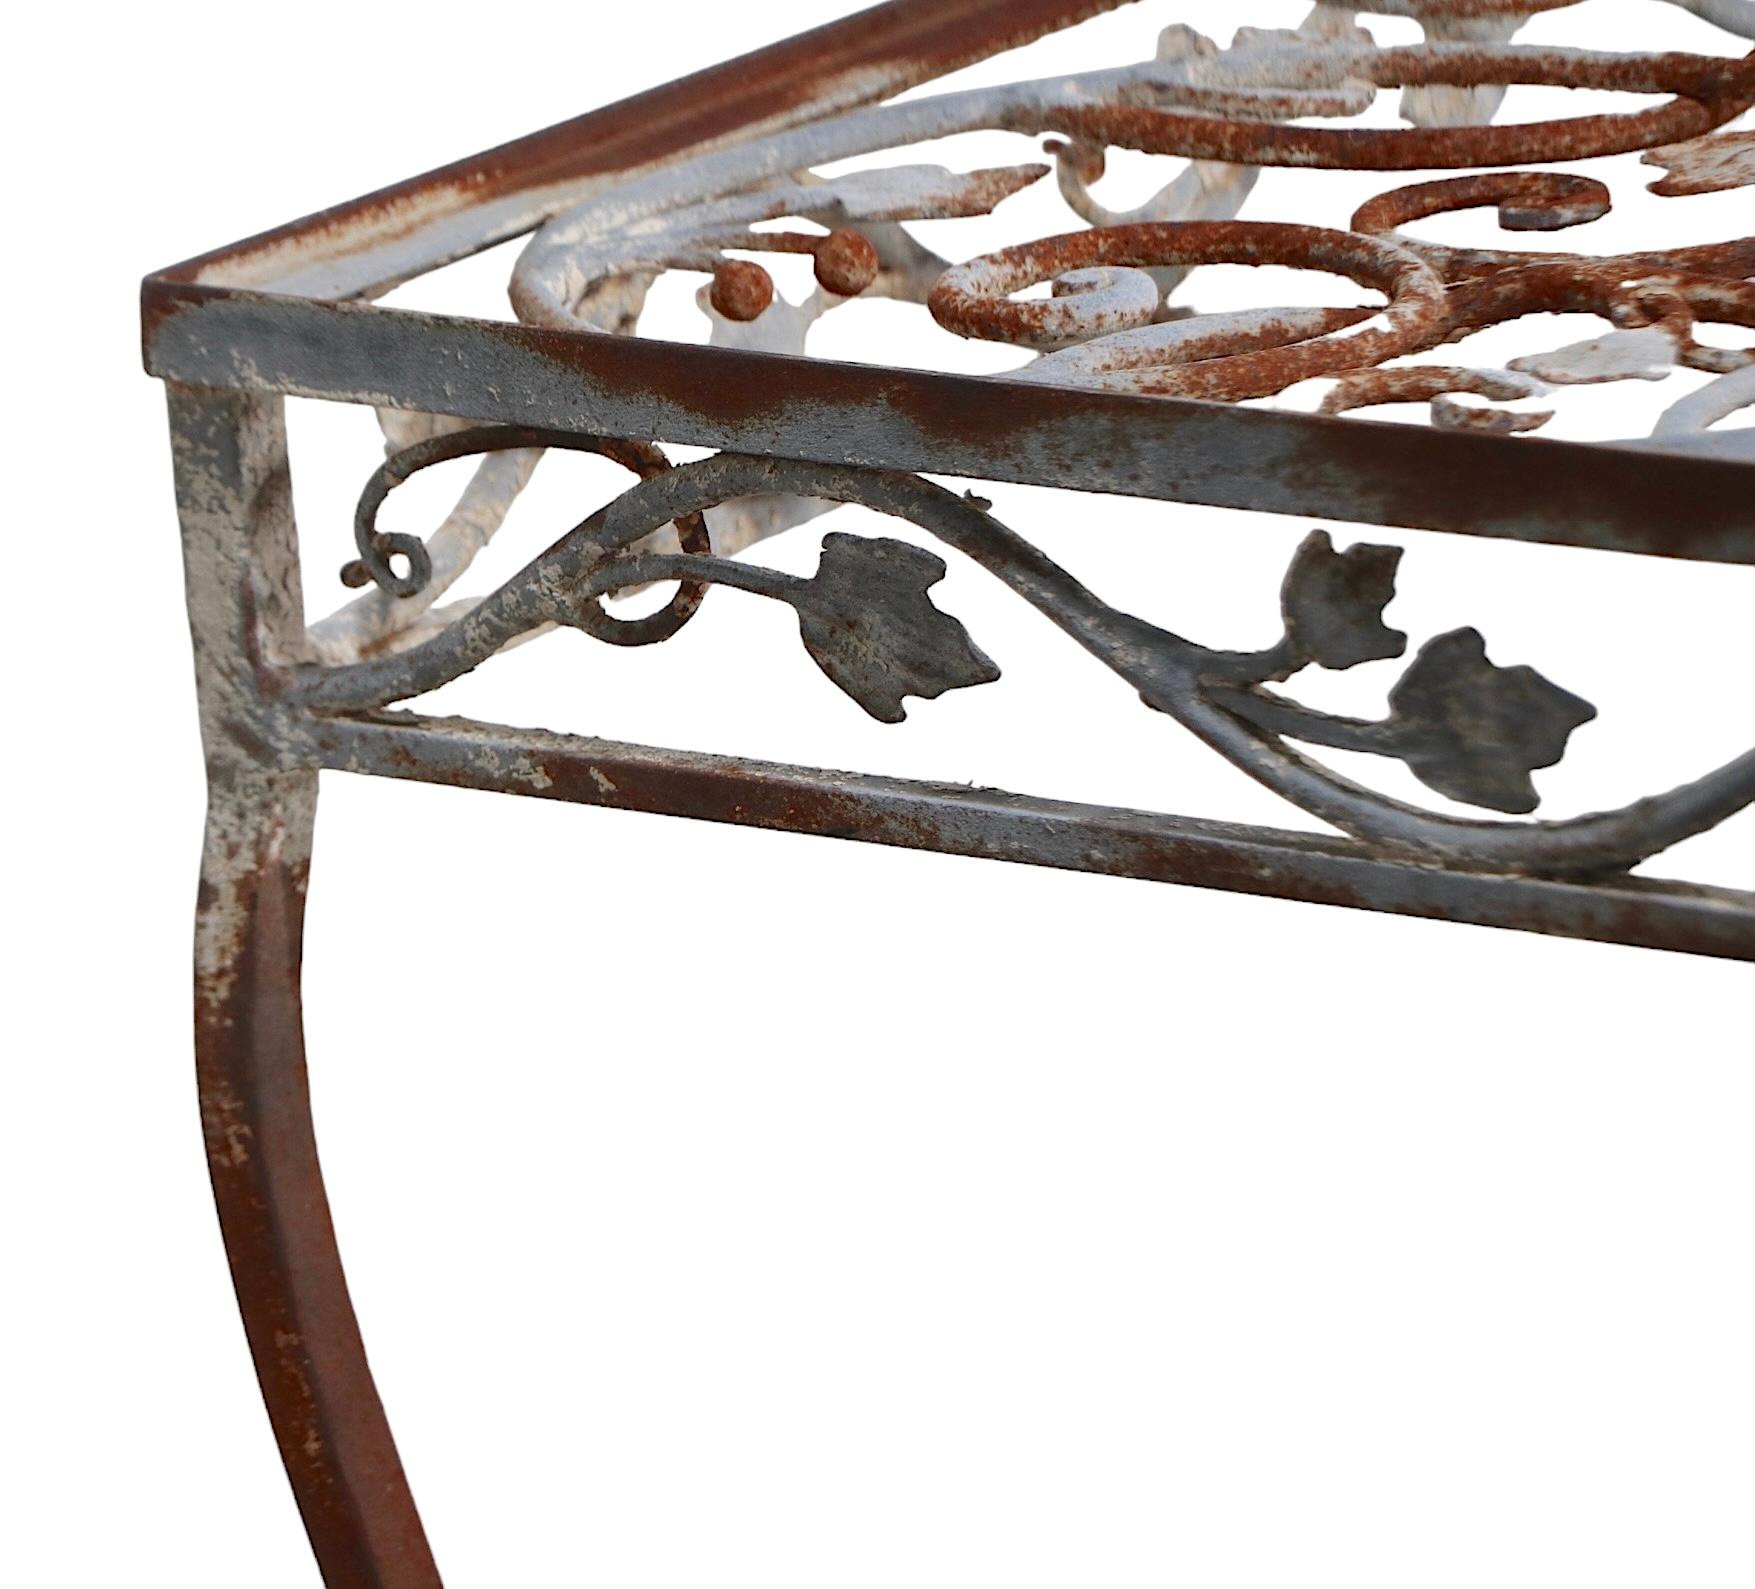 Exquisite wrought iron garden, patio, poolside  dining table by Salterini. The table features  intricate and  finely detailed foliate design metal work, it is in very good, original condition showing cosmetic wear, and light rust, normal and